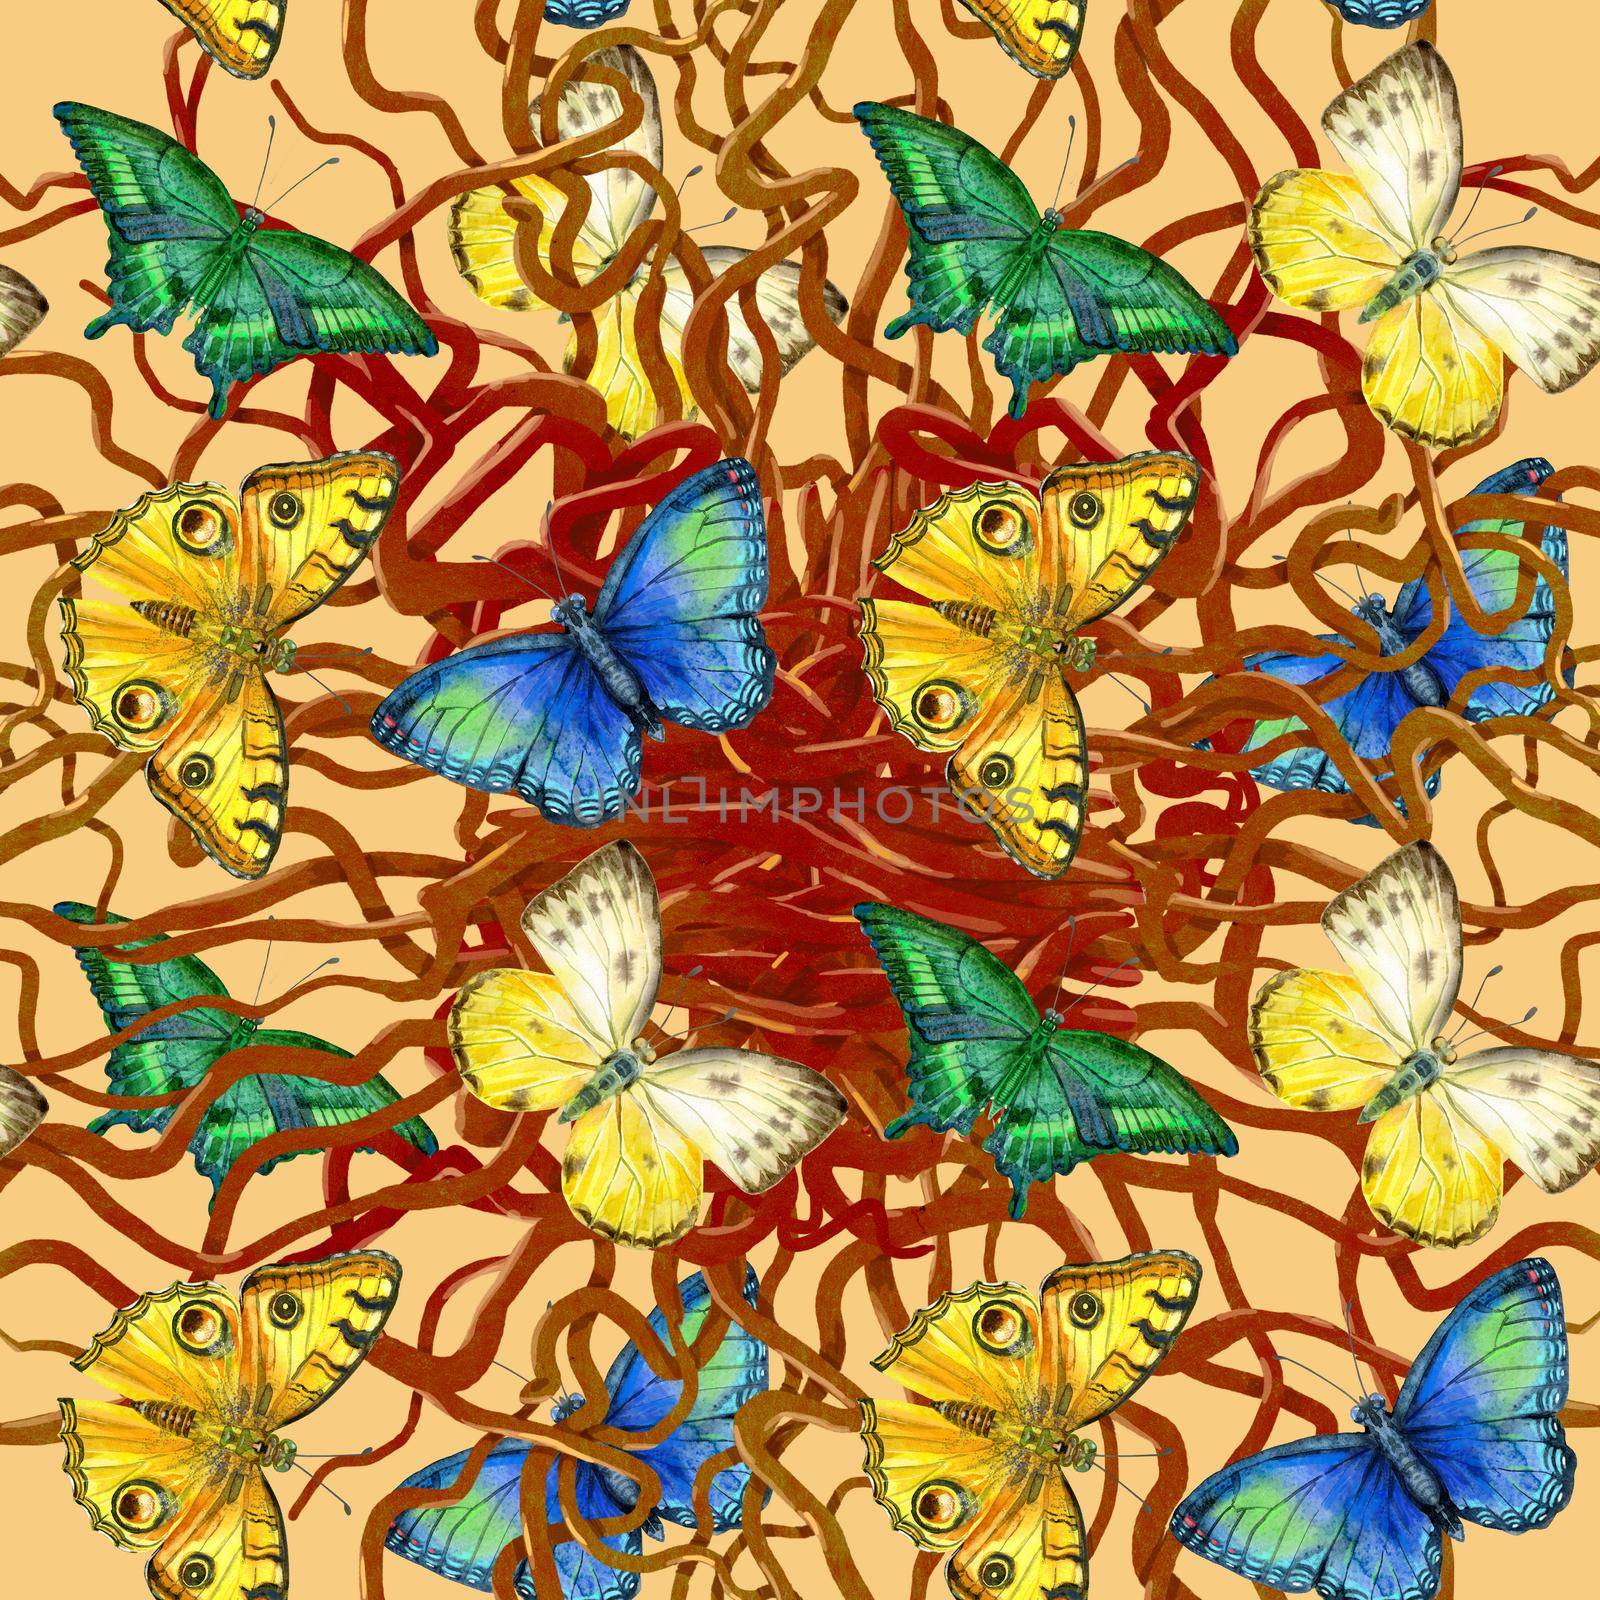 Floral leaves seamless pattern with colorful butterflies on yellow background. Artistic design for floral print for packaging, textile, wallpaper, gift wrap, greeting or wedding background.